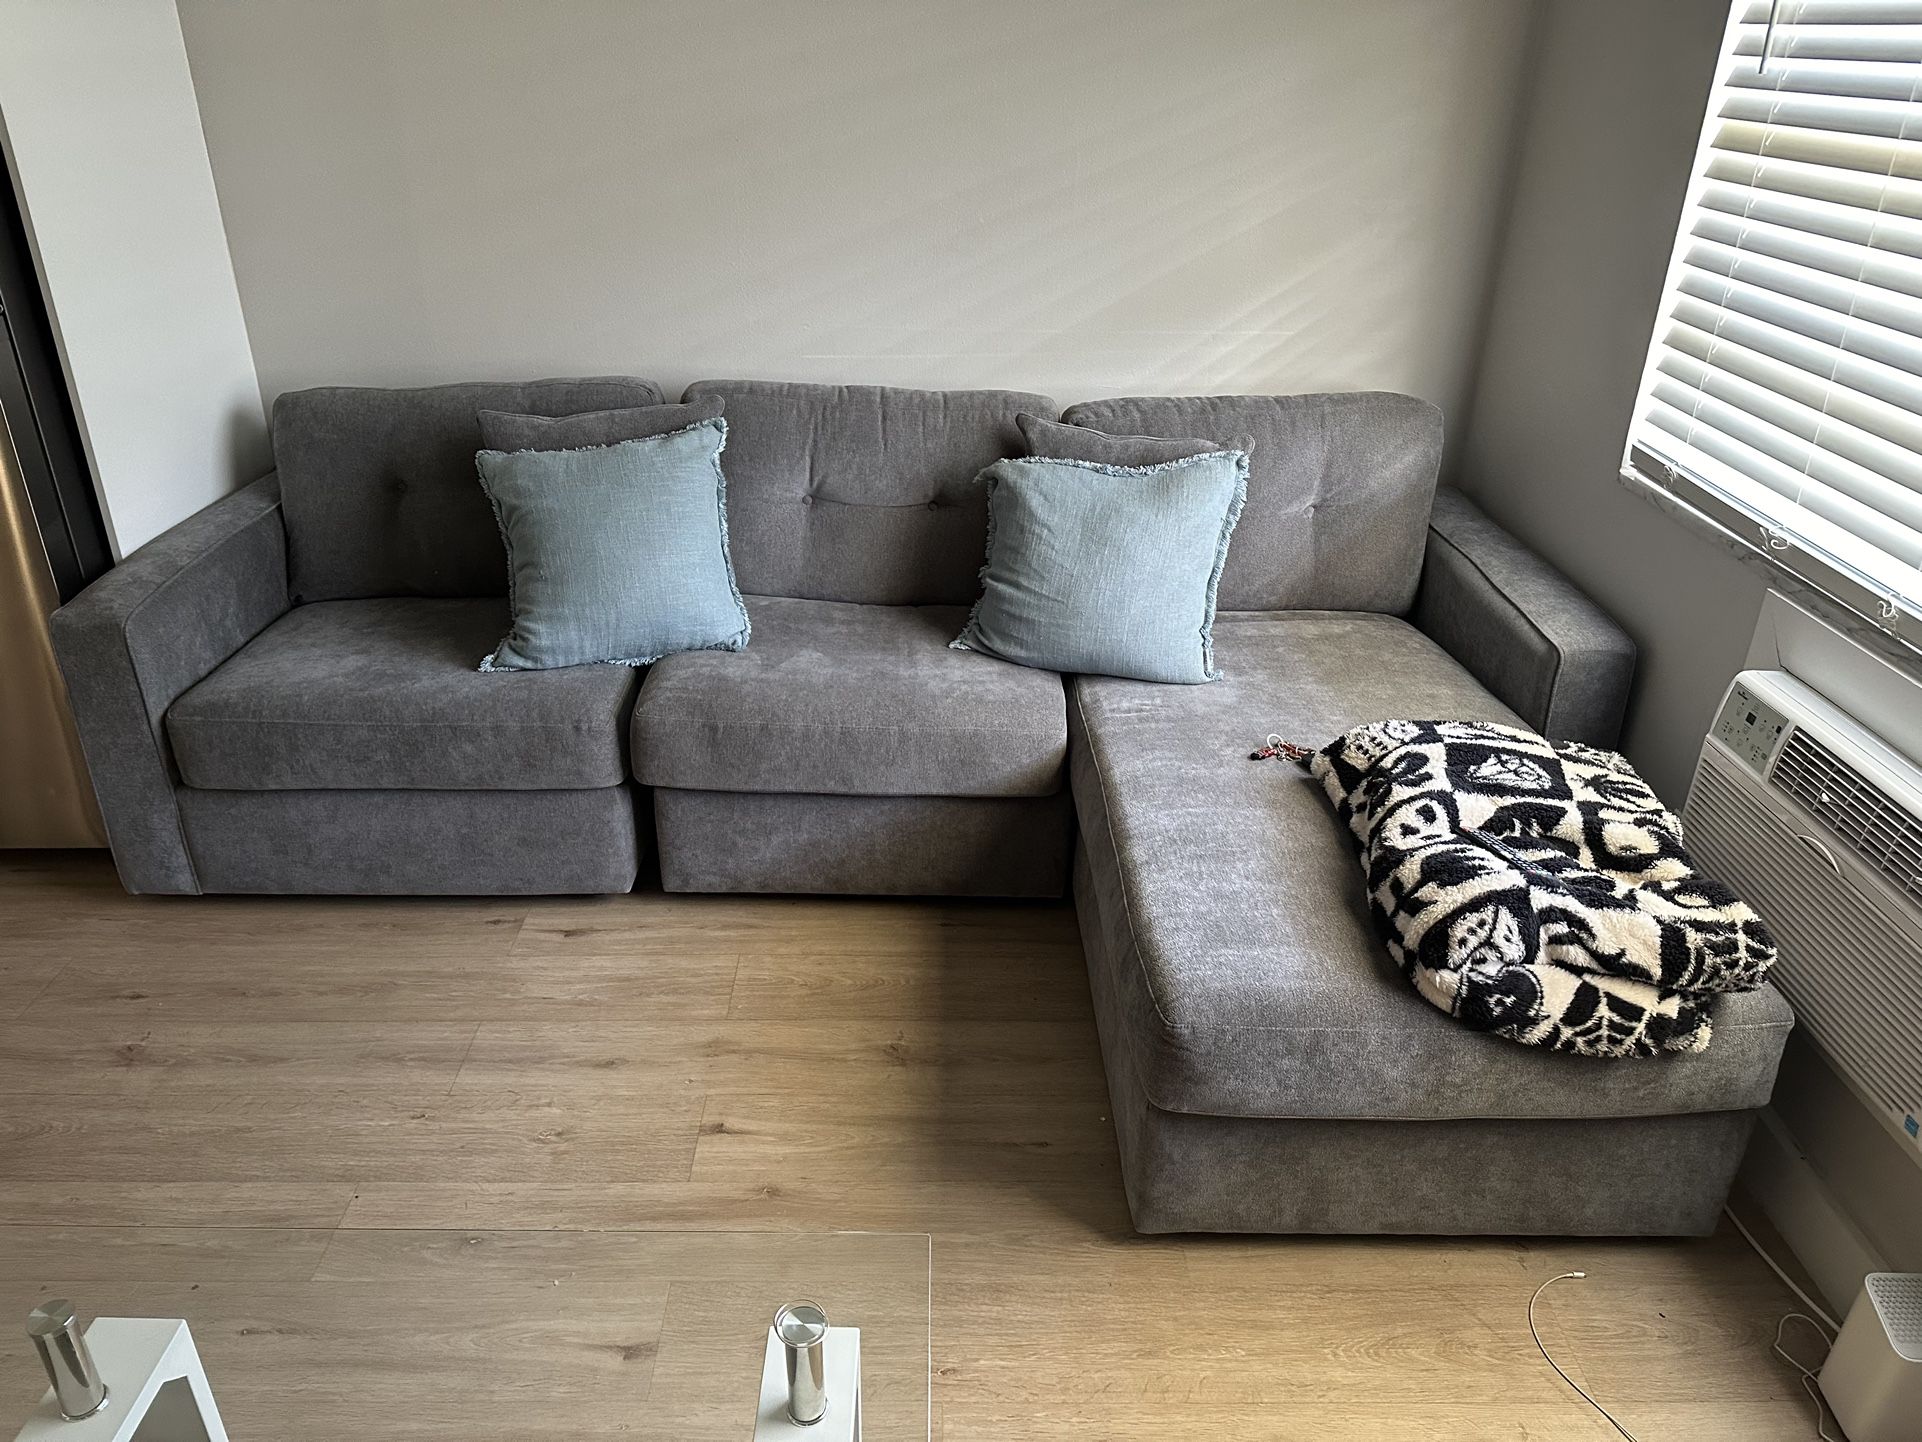 Couch With Pillows/ Table That Extends With Chairs 